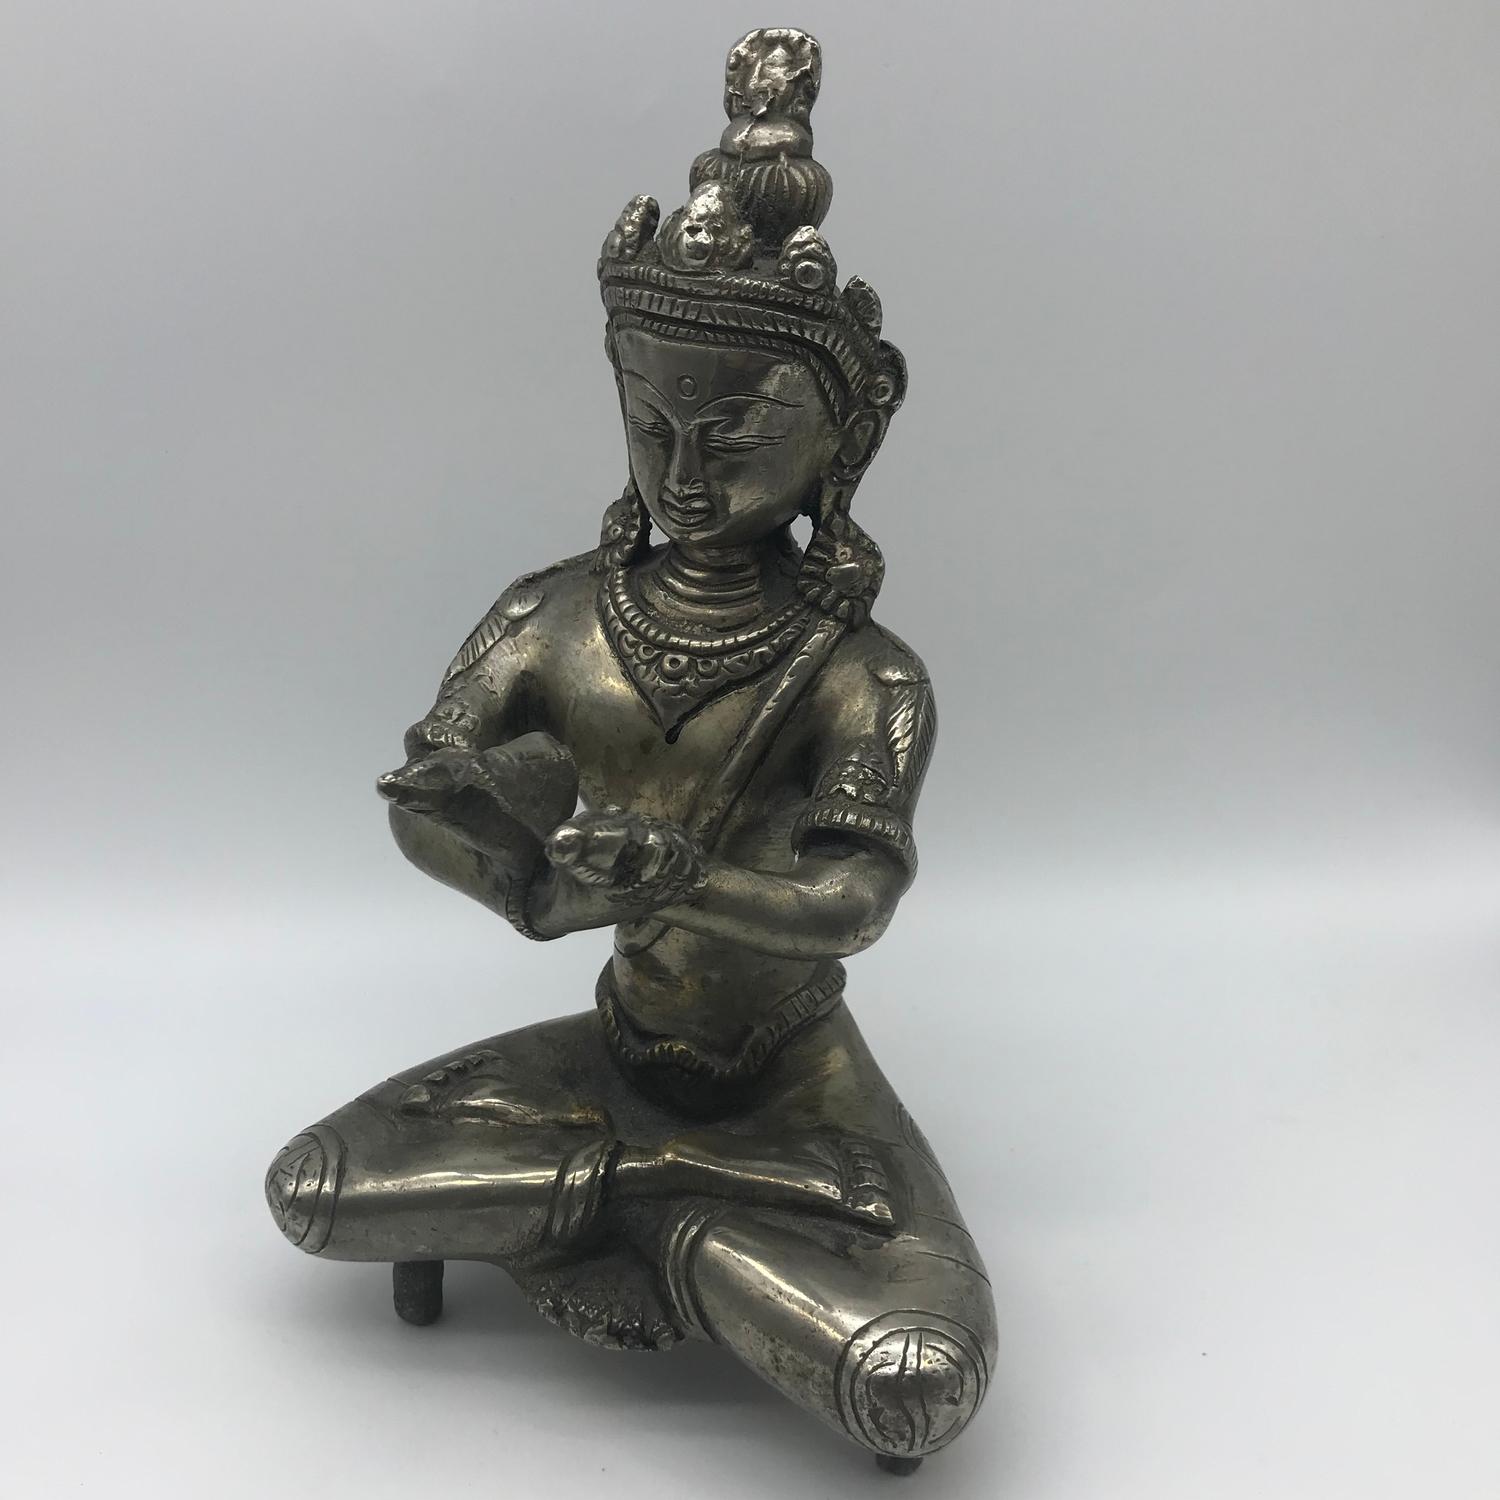 A Large heavy bronze Thai Buddha figure, Measures 25cm in height